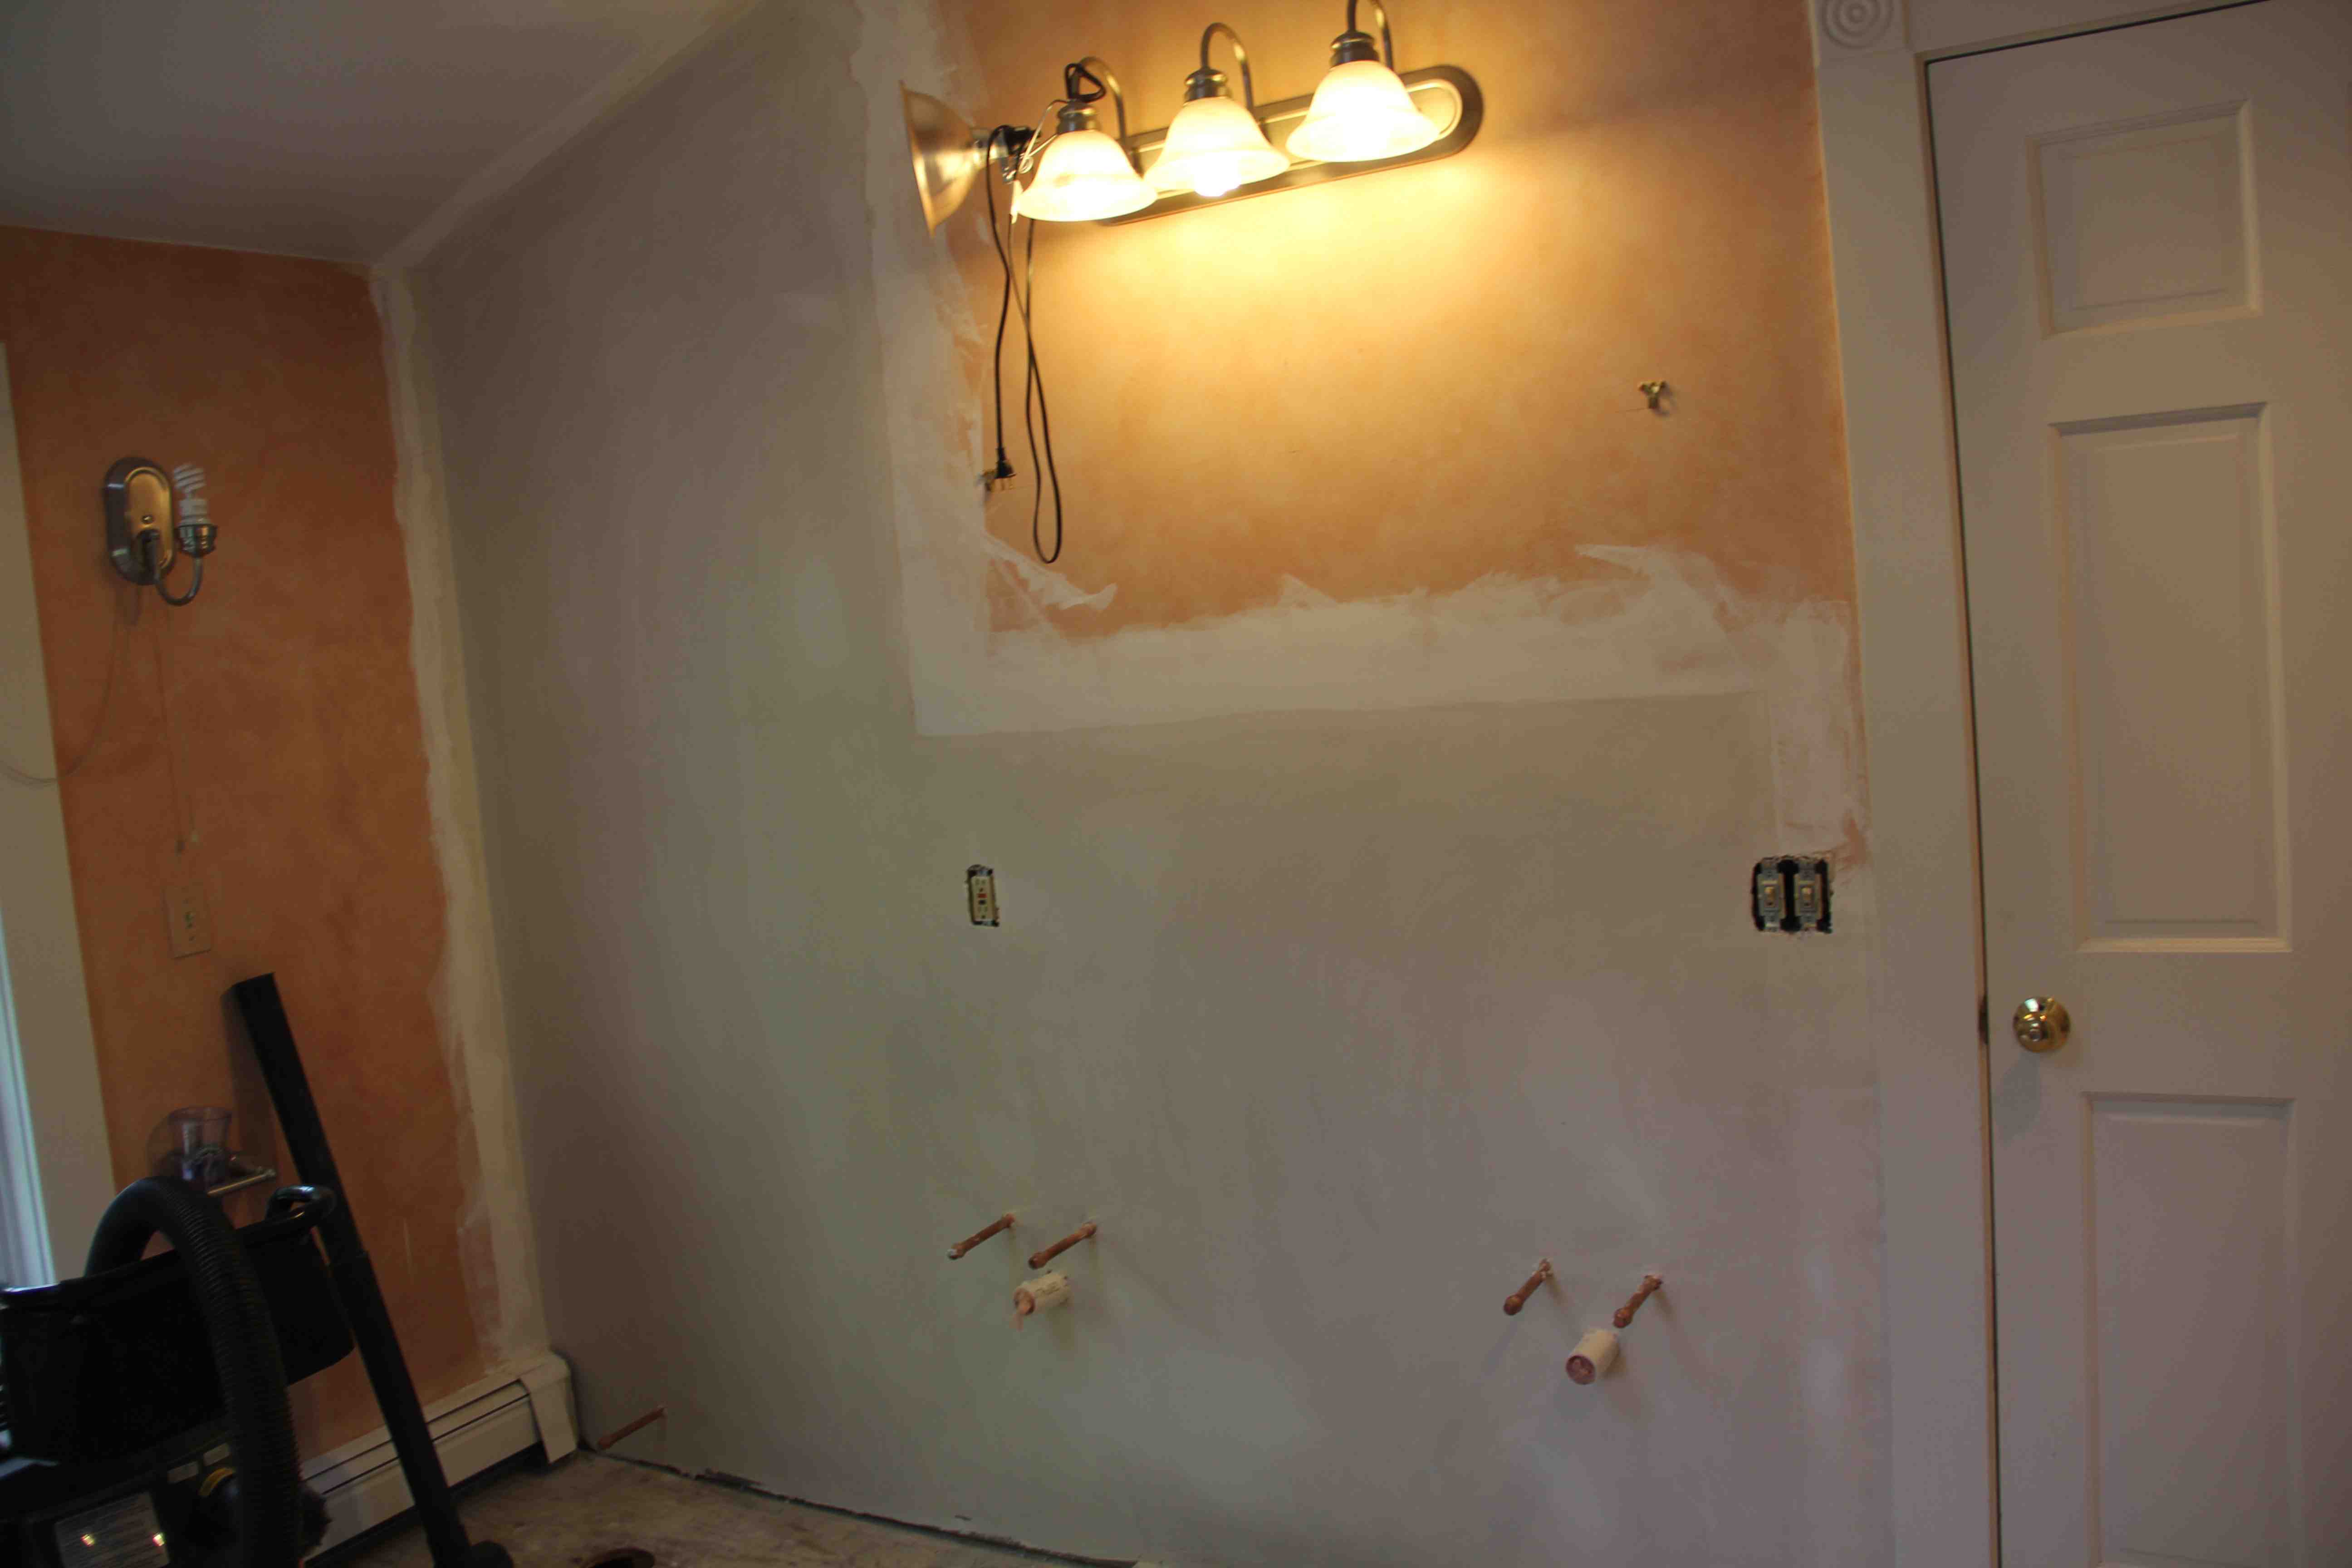 How long does it take for wall plaster to dry?